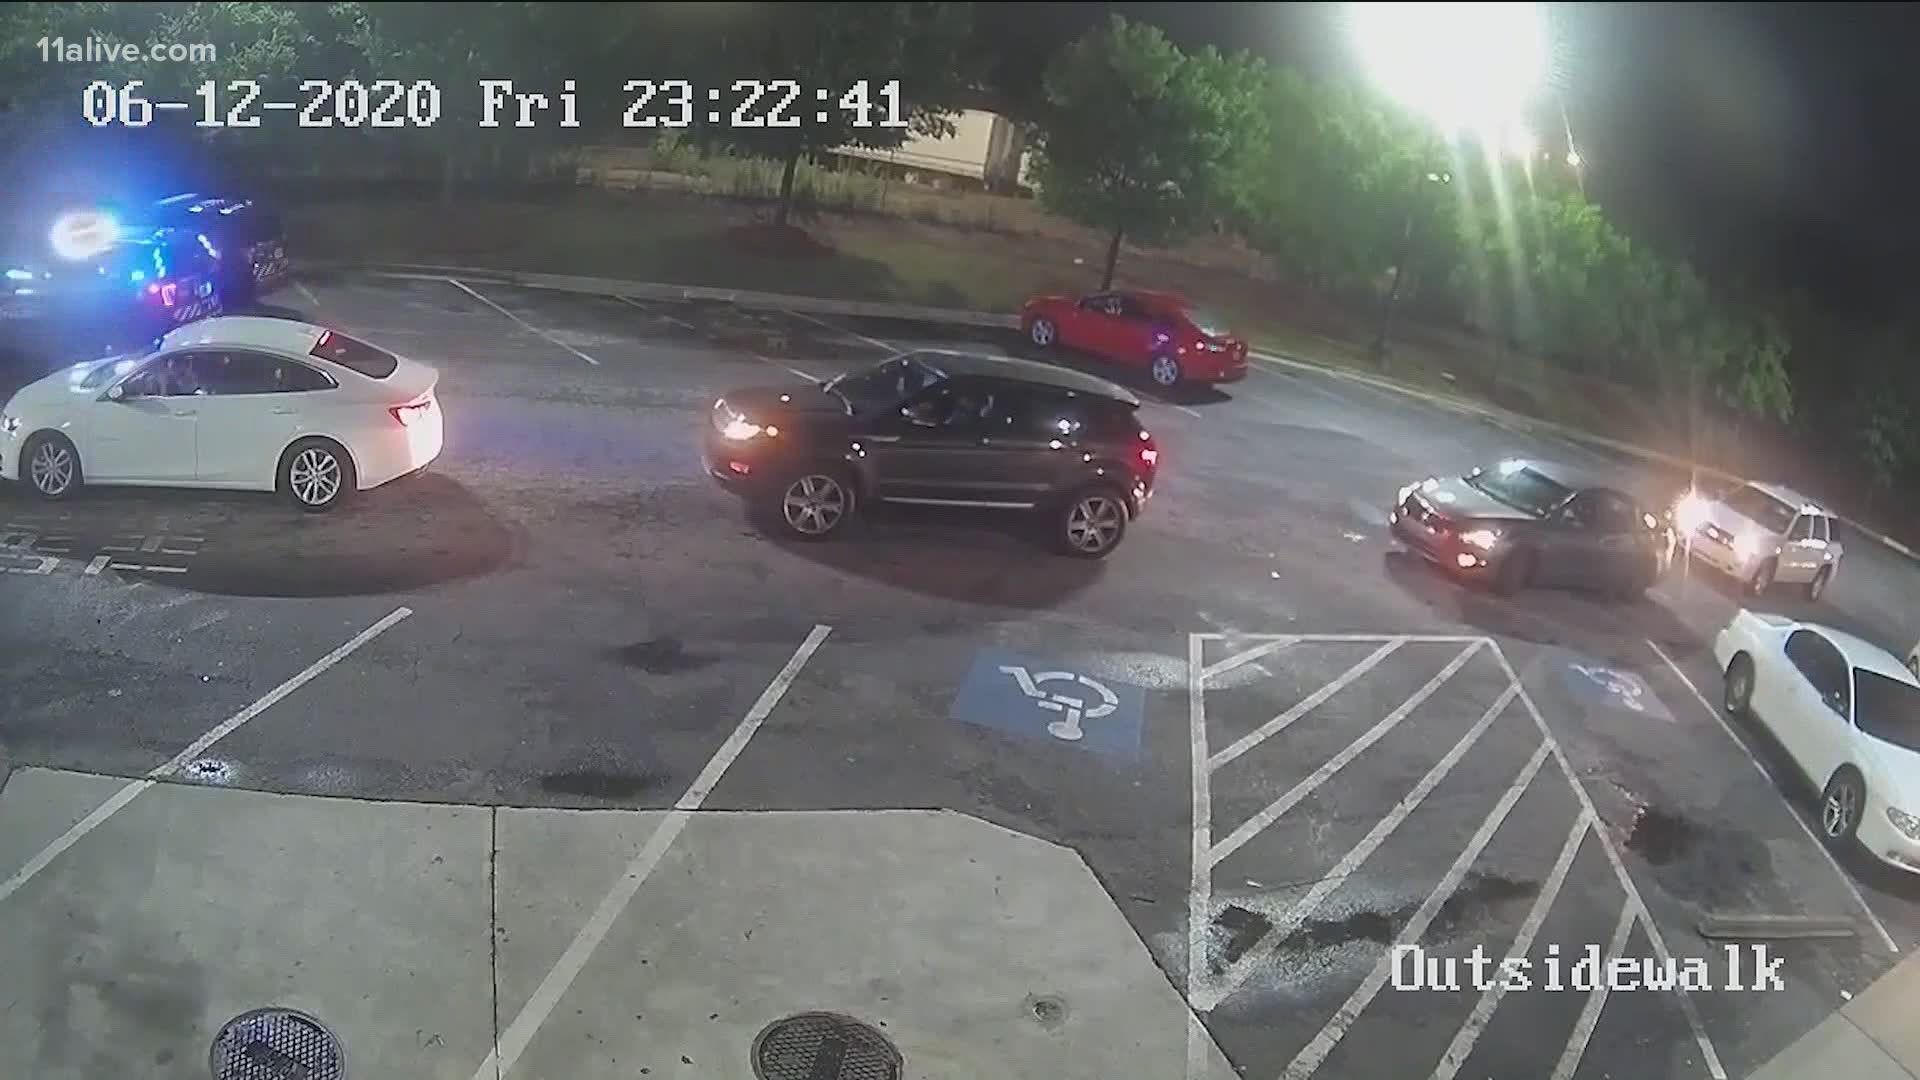 Surveillance video shows from the Wendy's on University Ave. in Atlanta shows the shooting of Rayshard Brooks.